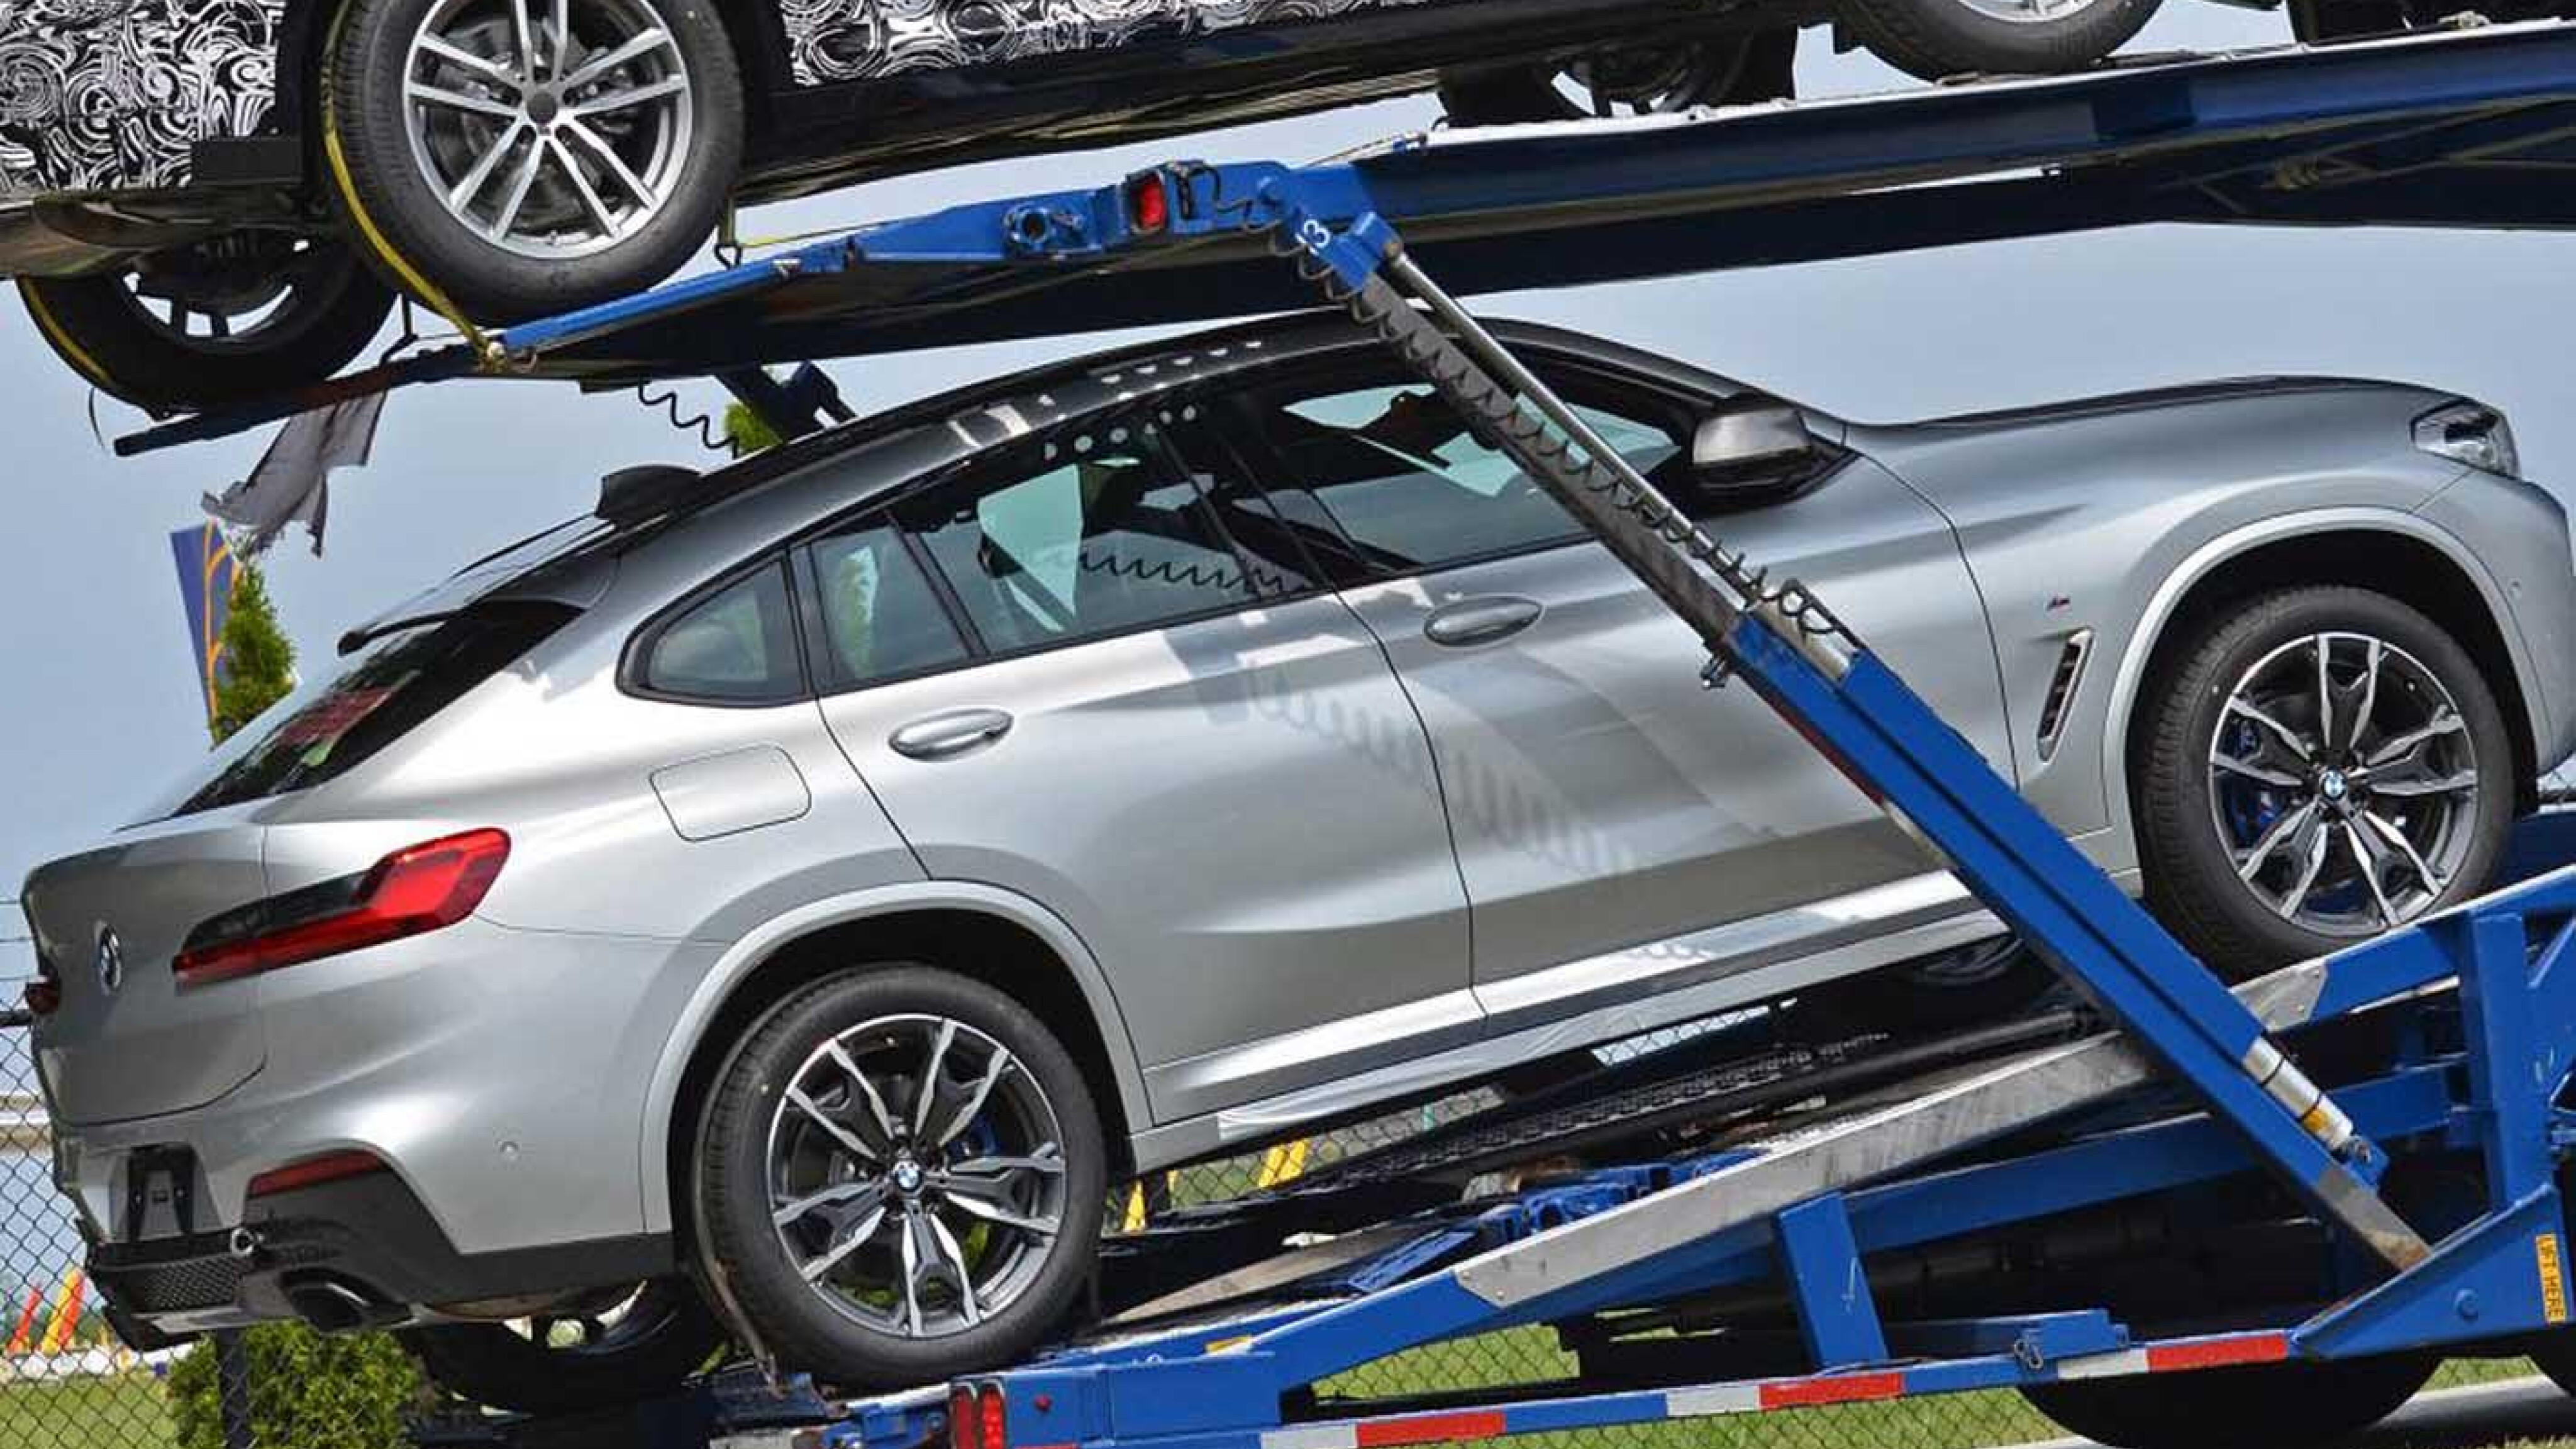 2019 BMW X4 spotted in the flesh